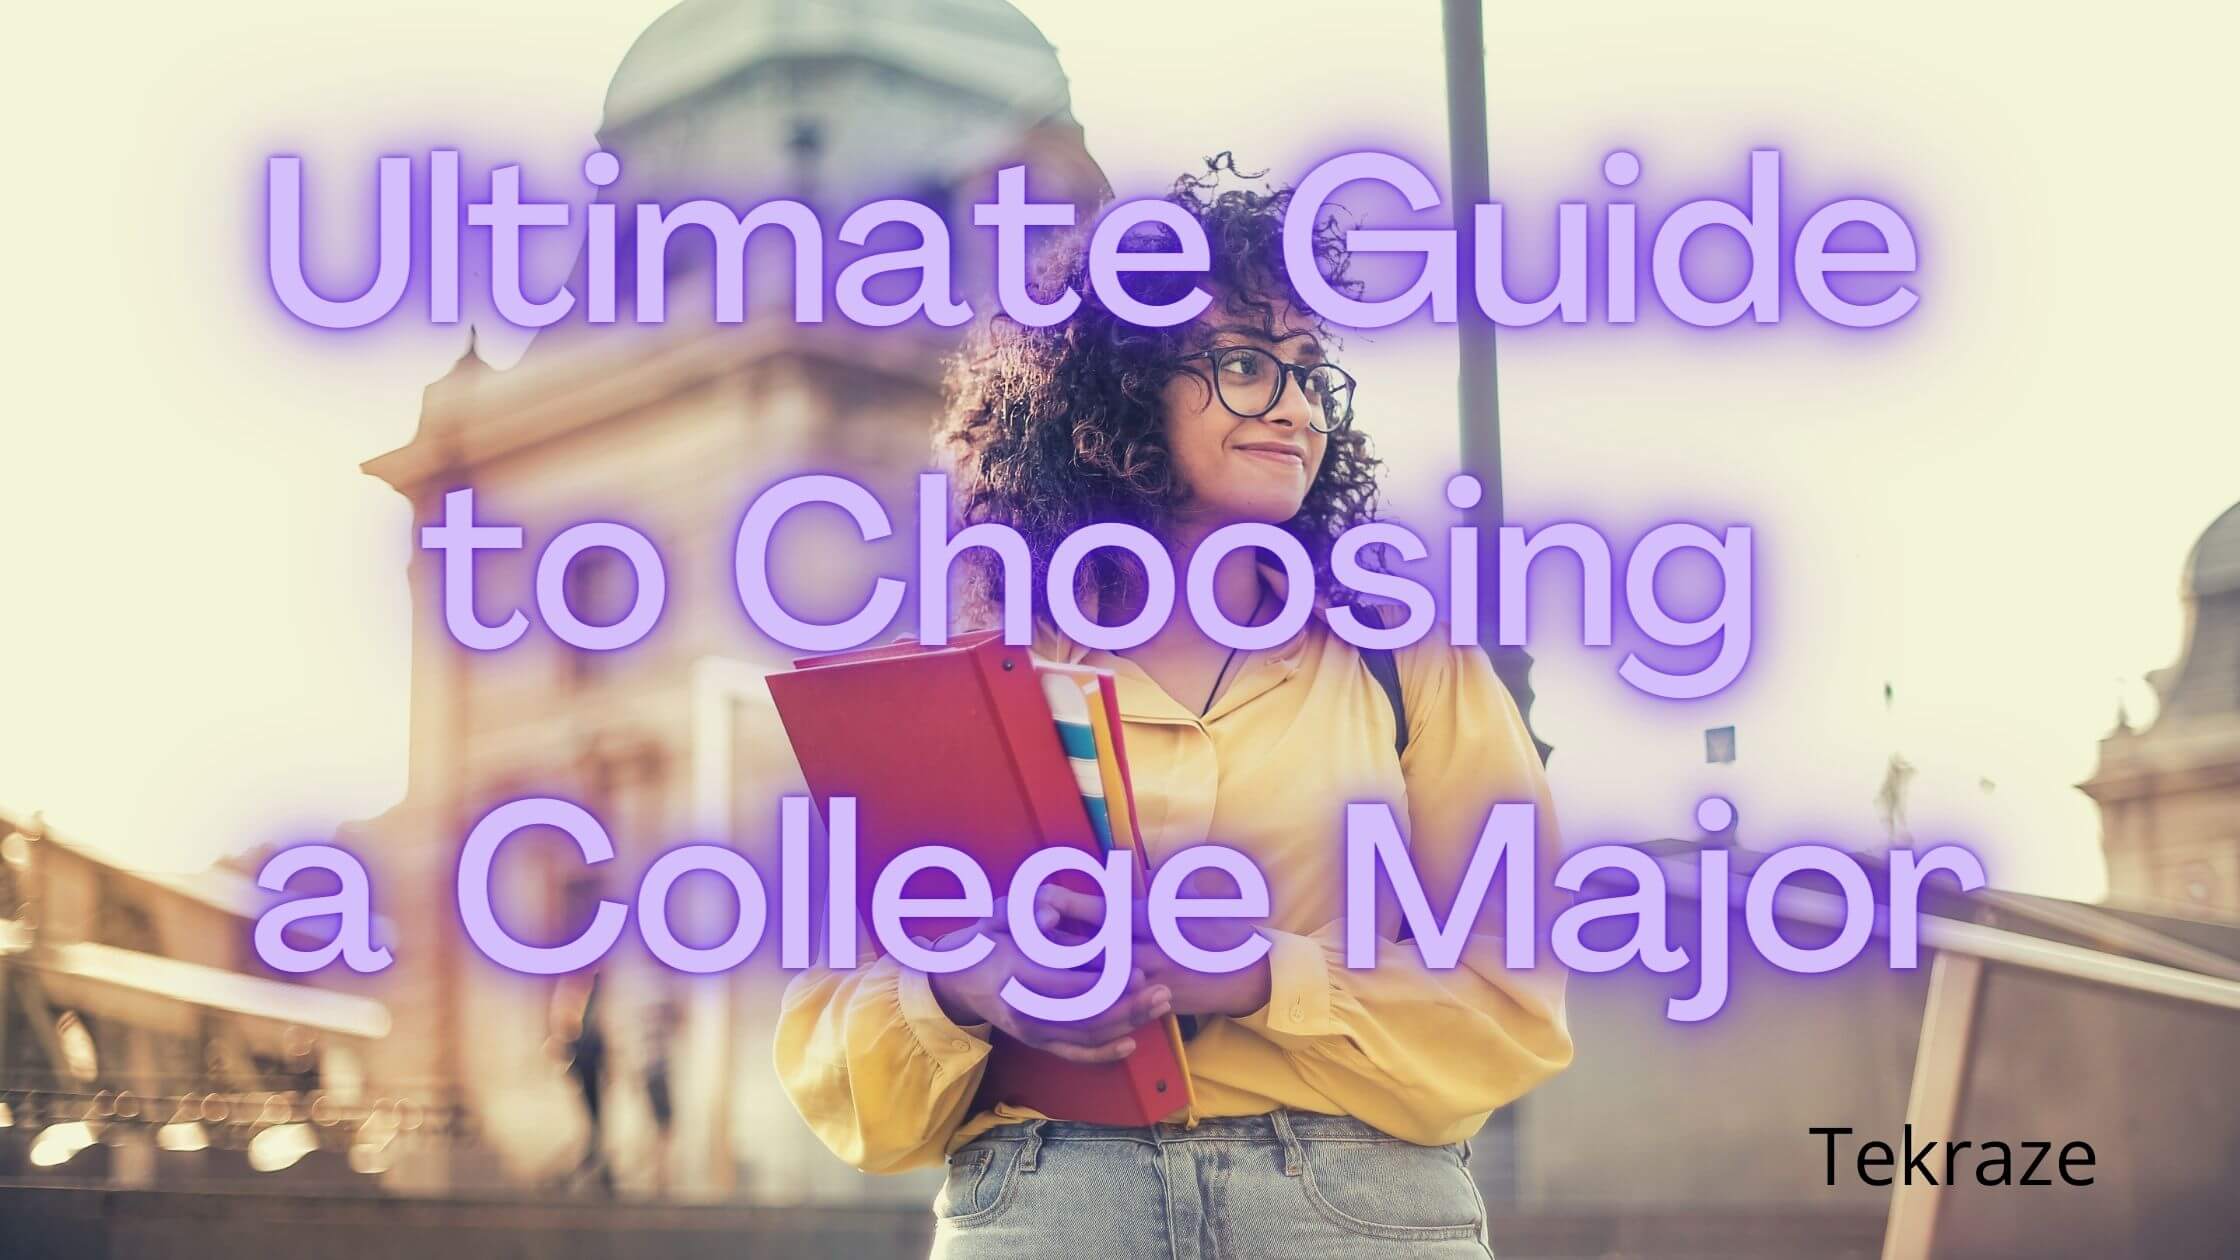 Guide to choosing a college major